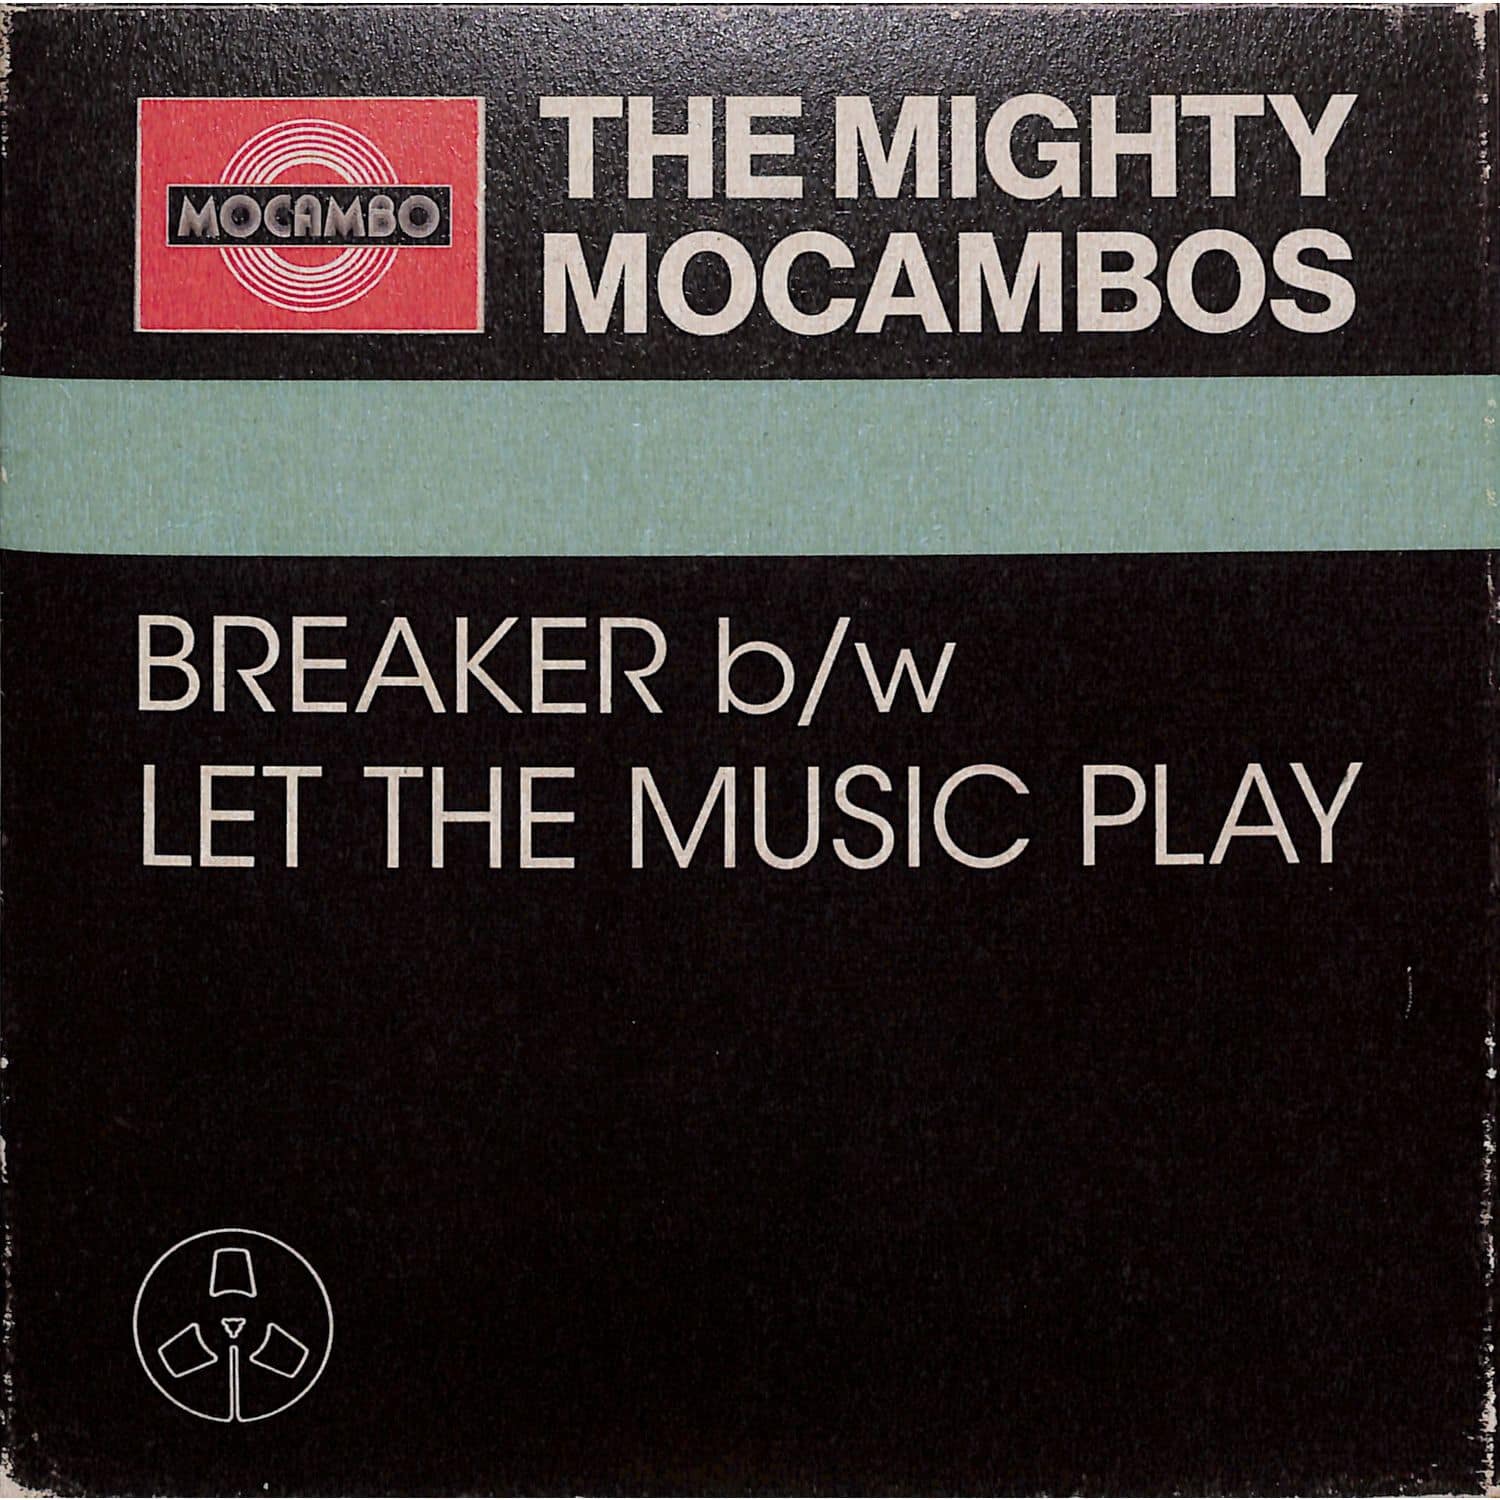 The Mighty Mocambos - BREAKER B/W LET THE MUSIC PLAY 